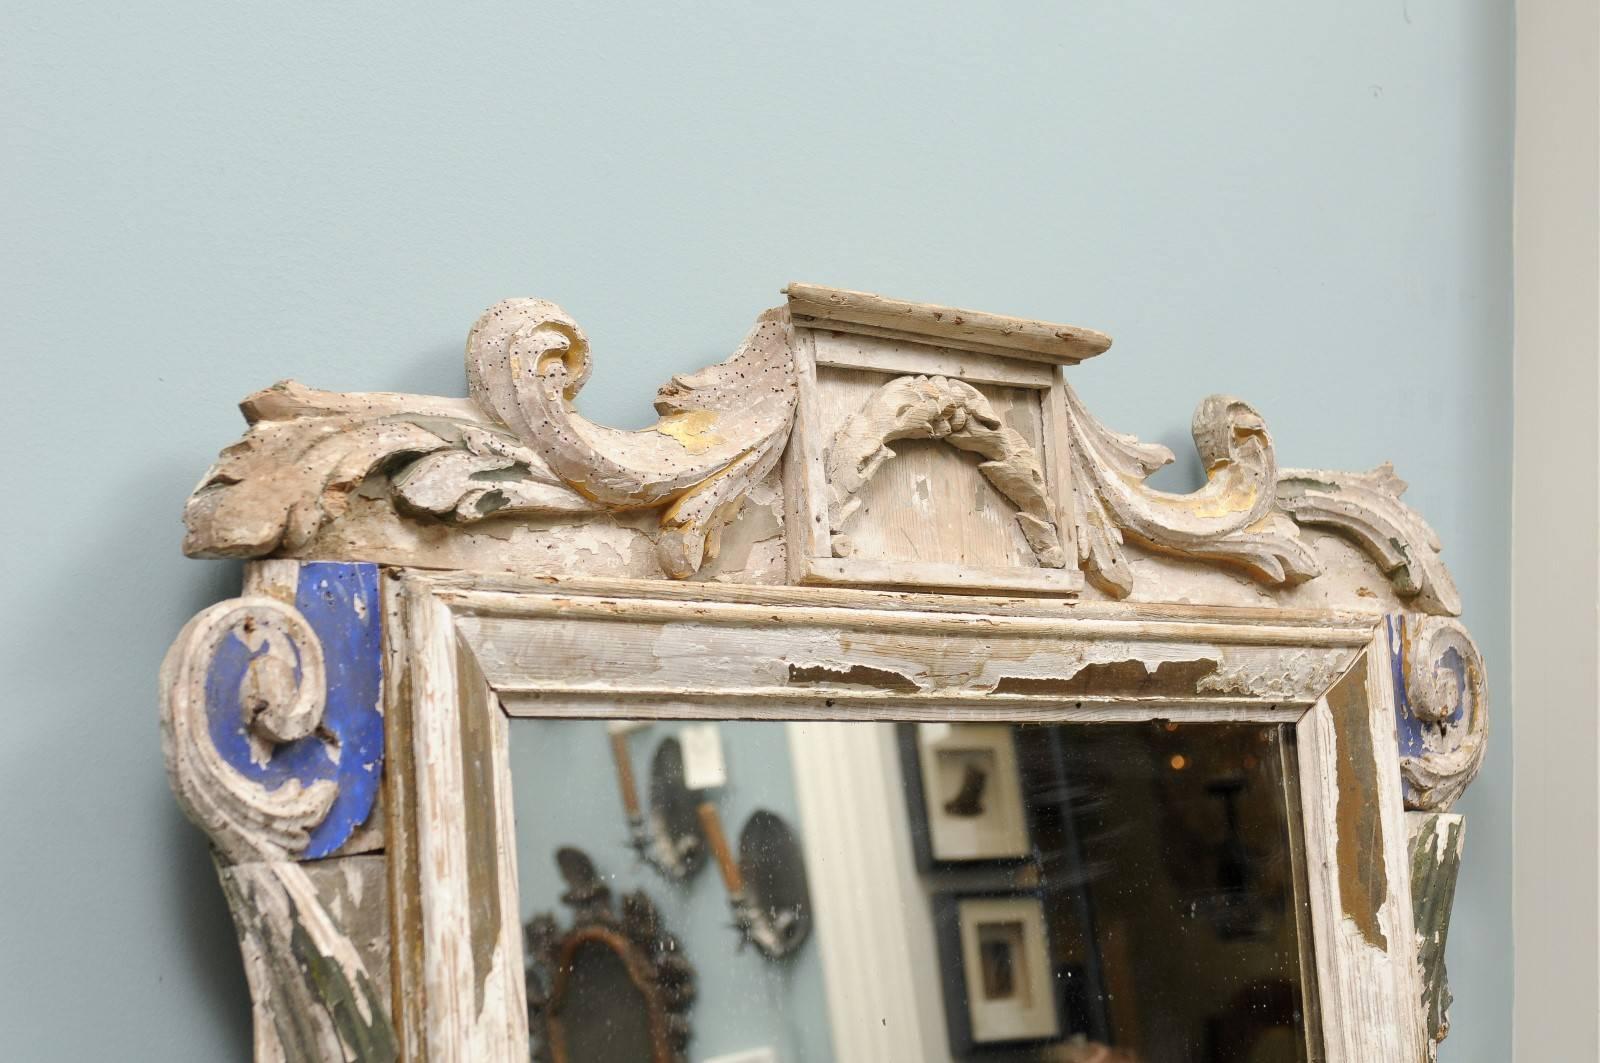 Painted Italian 19th Century Carved Wood Mirror with Volutes Motifs and Blue Accents